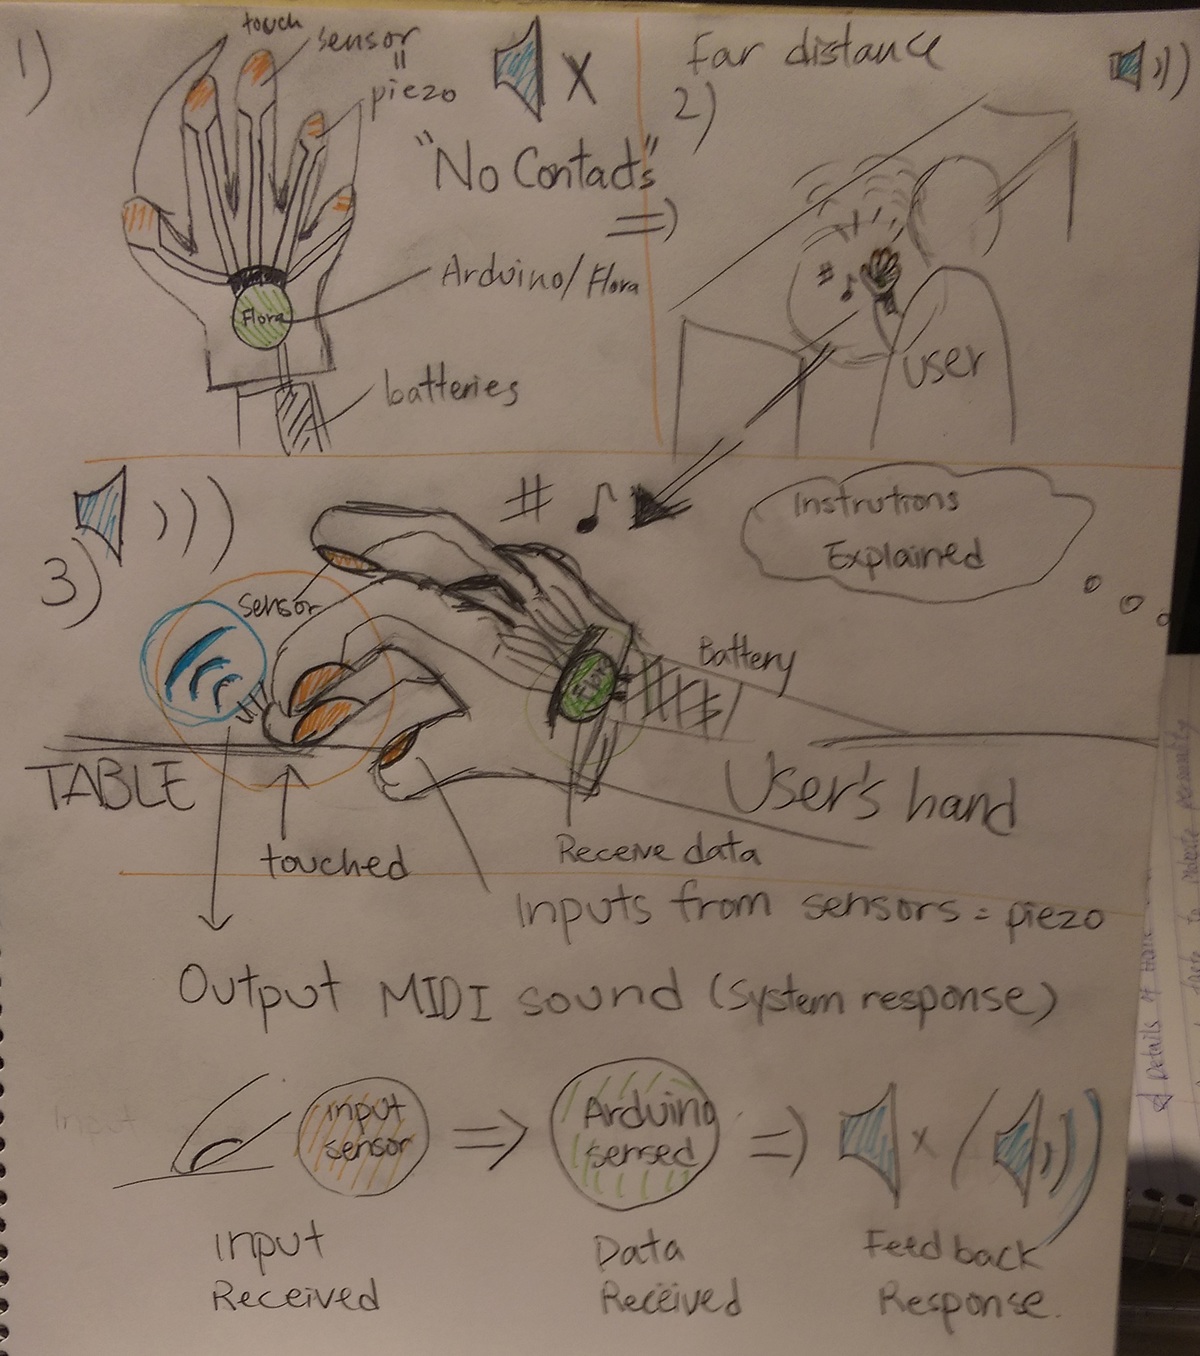 Concept ideation Wearable MIDI glove